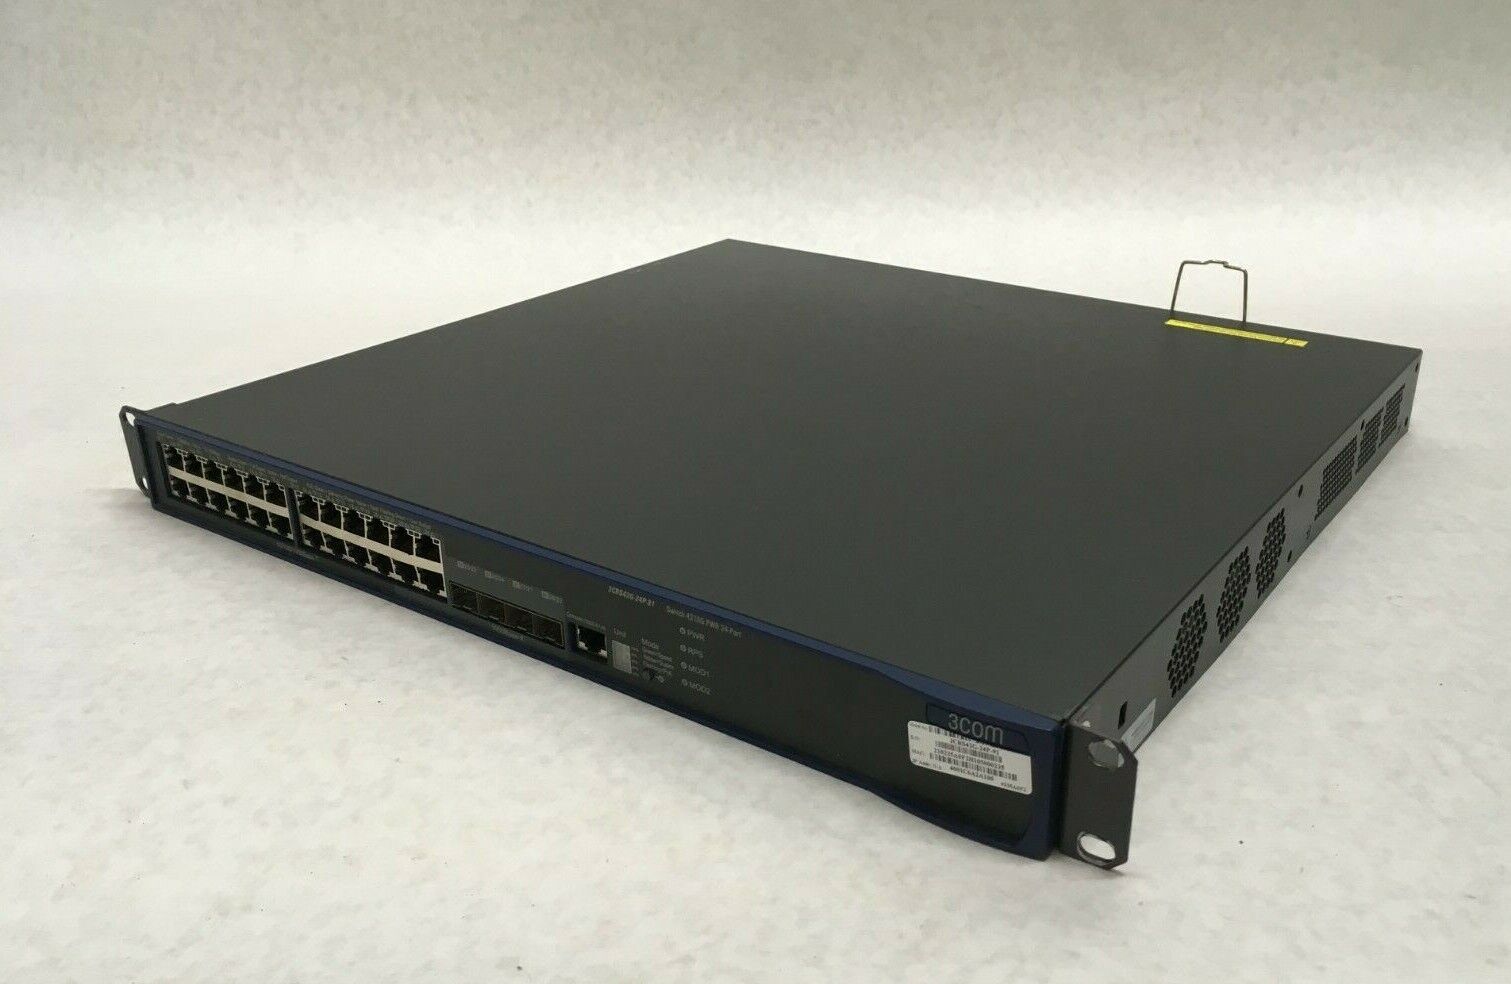 3Com HP 4210G PWR 24 Port PoE Ethernet Switch 3CRS42G-24P-91